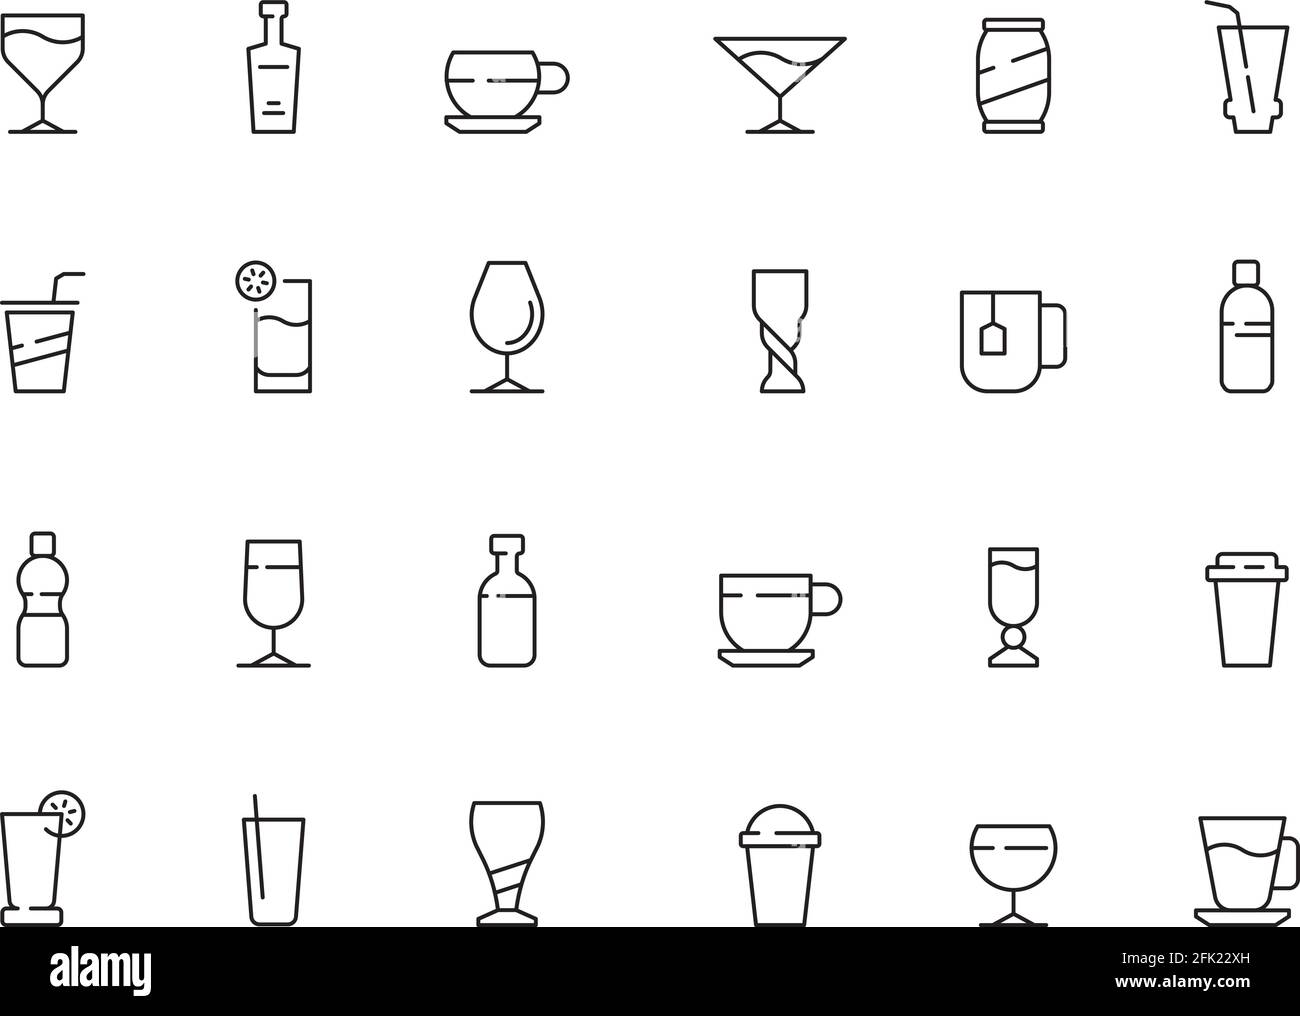 Drinks symbols. Cups and glasses of hot and cold drinks soda water coffee tea alcohol vector icons collection Stock Vector